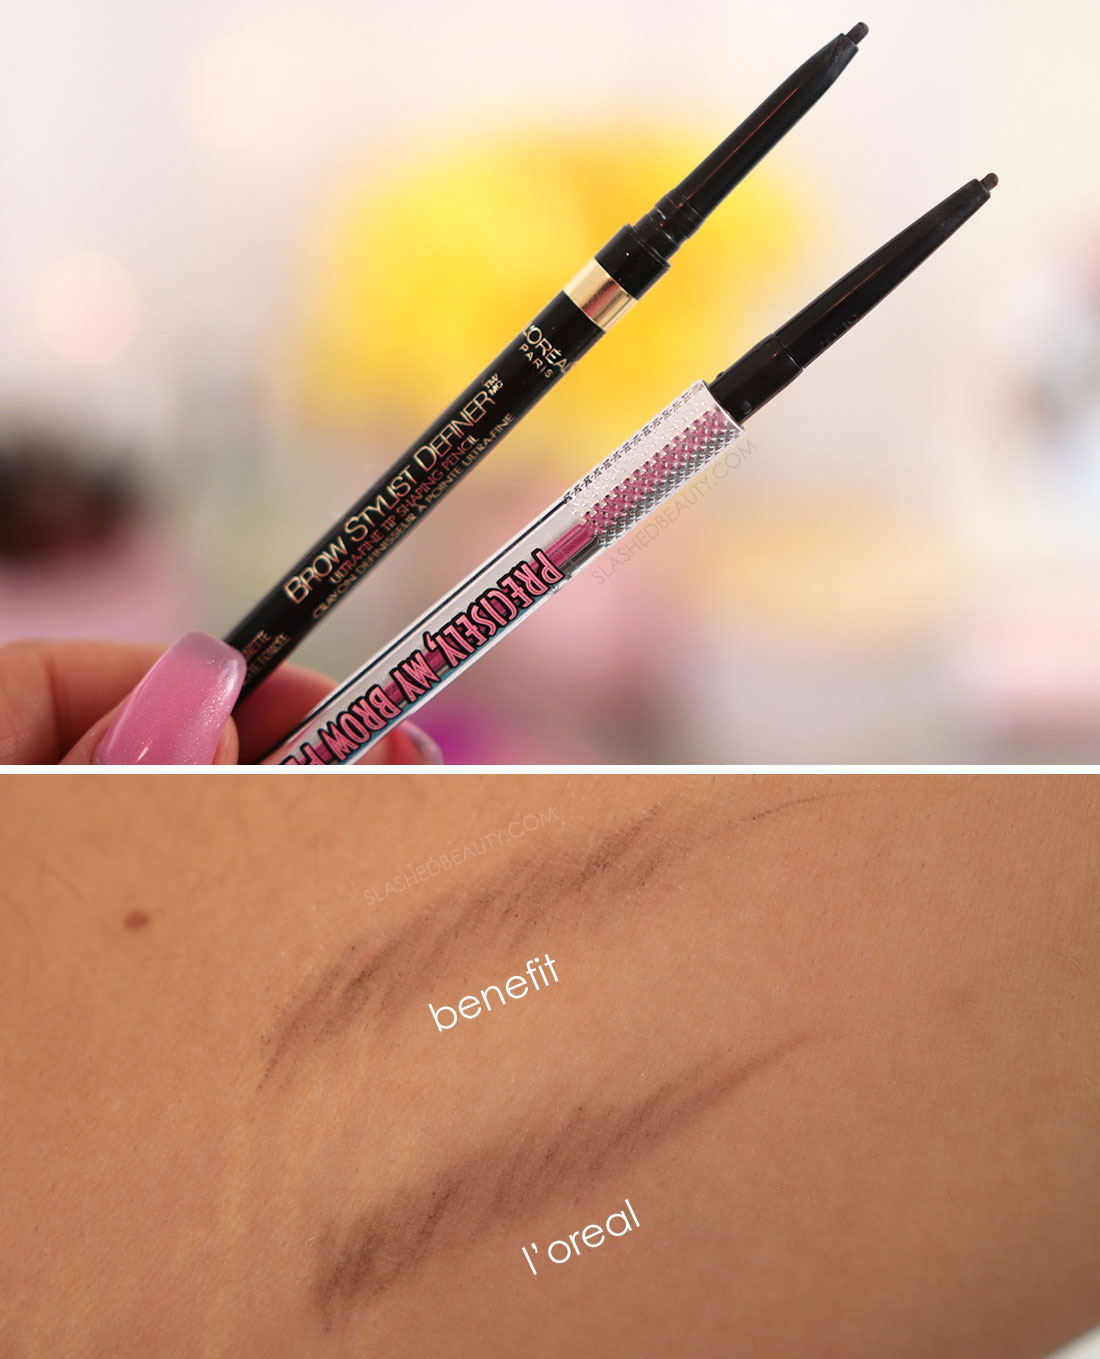 Benefit Precisely My Brow and L'Oreal Brow Stylist Definer Pencil side by side, swatched | 5 Drugstore Dupes of High End Makeup Faves | Slashed Beauty